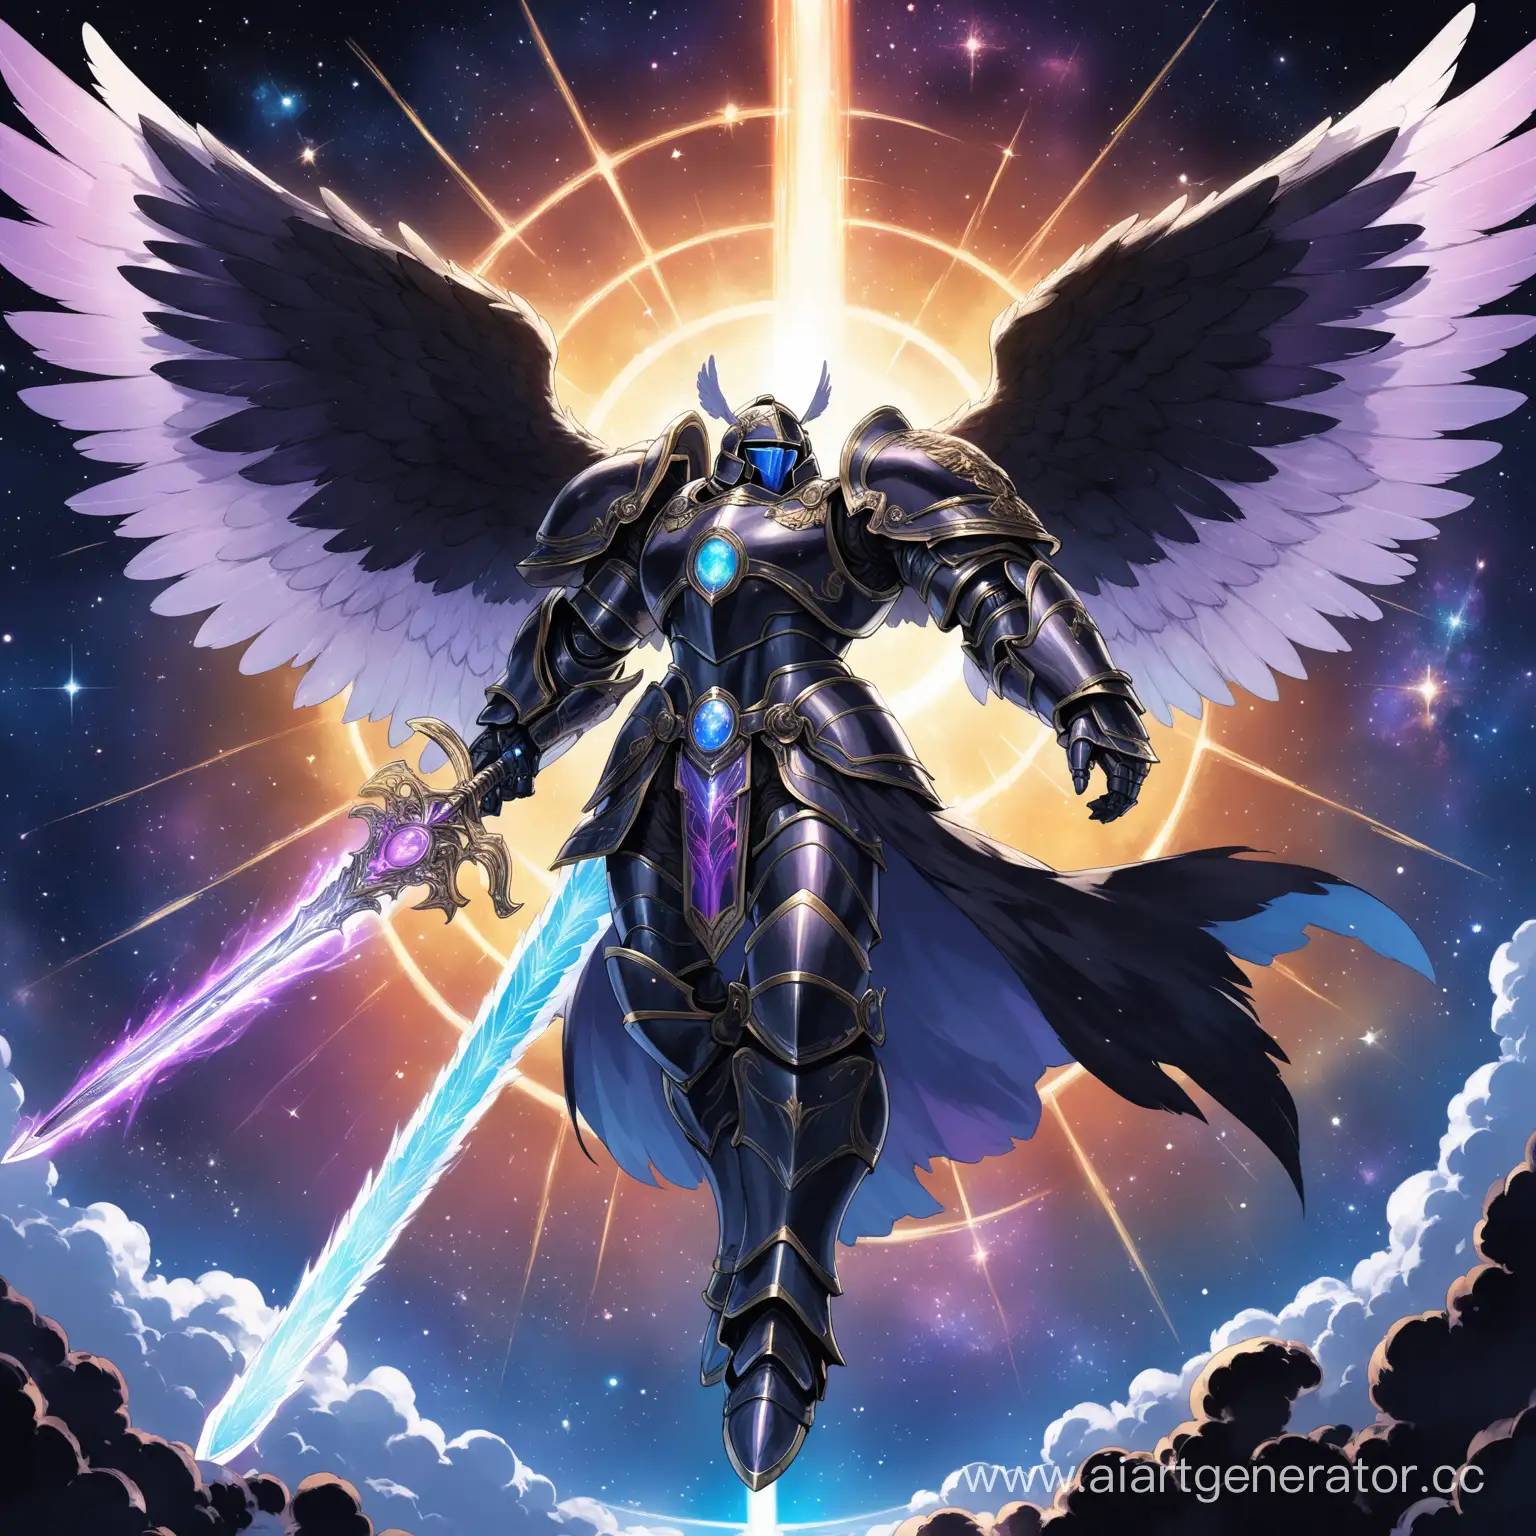 A giant archangel knight, 4 wings; iridescent black armor; a large space cannon flies next to him; he holds a sword consisting of cosmic energy in his hands